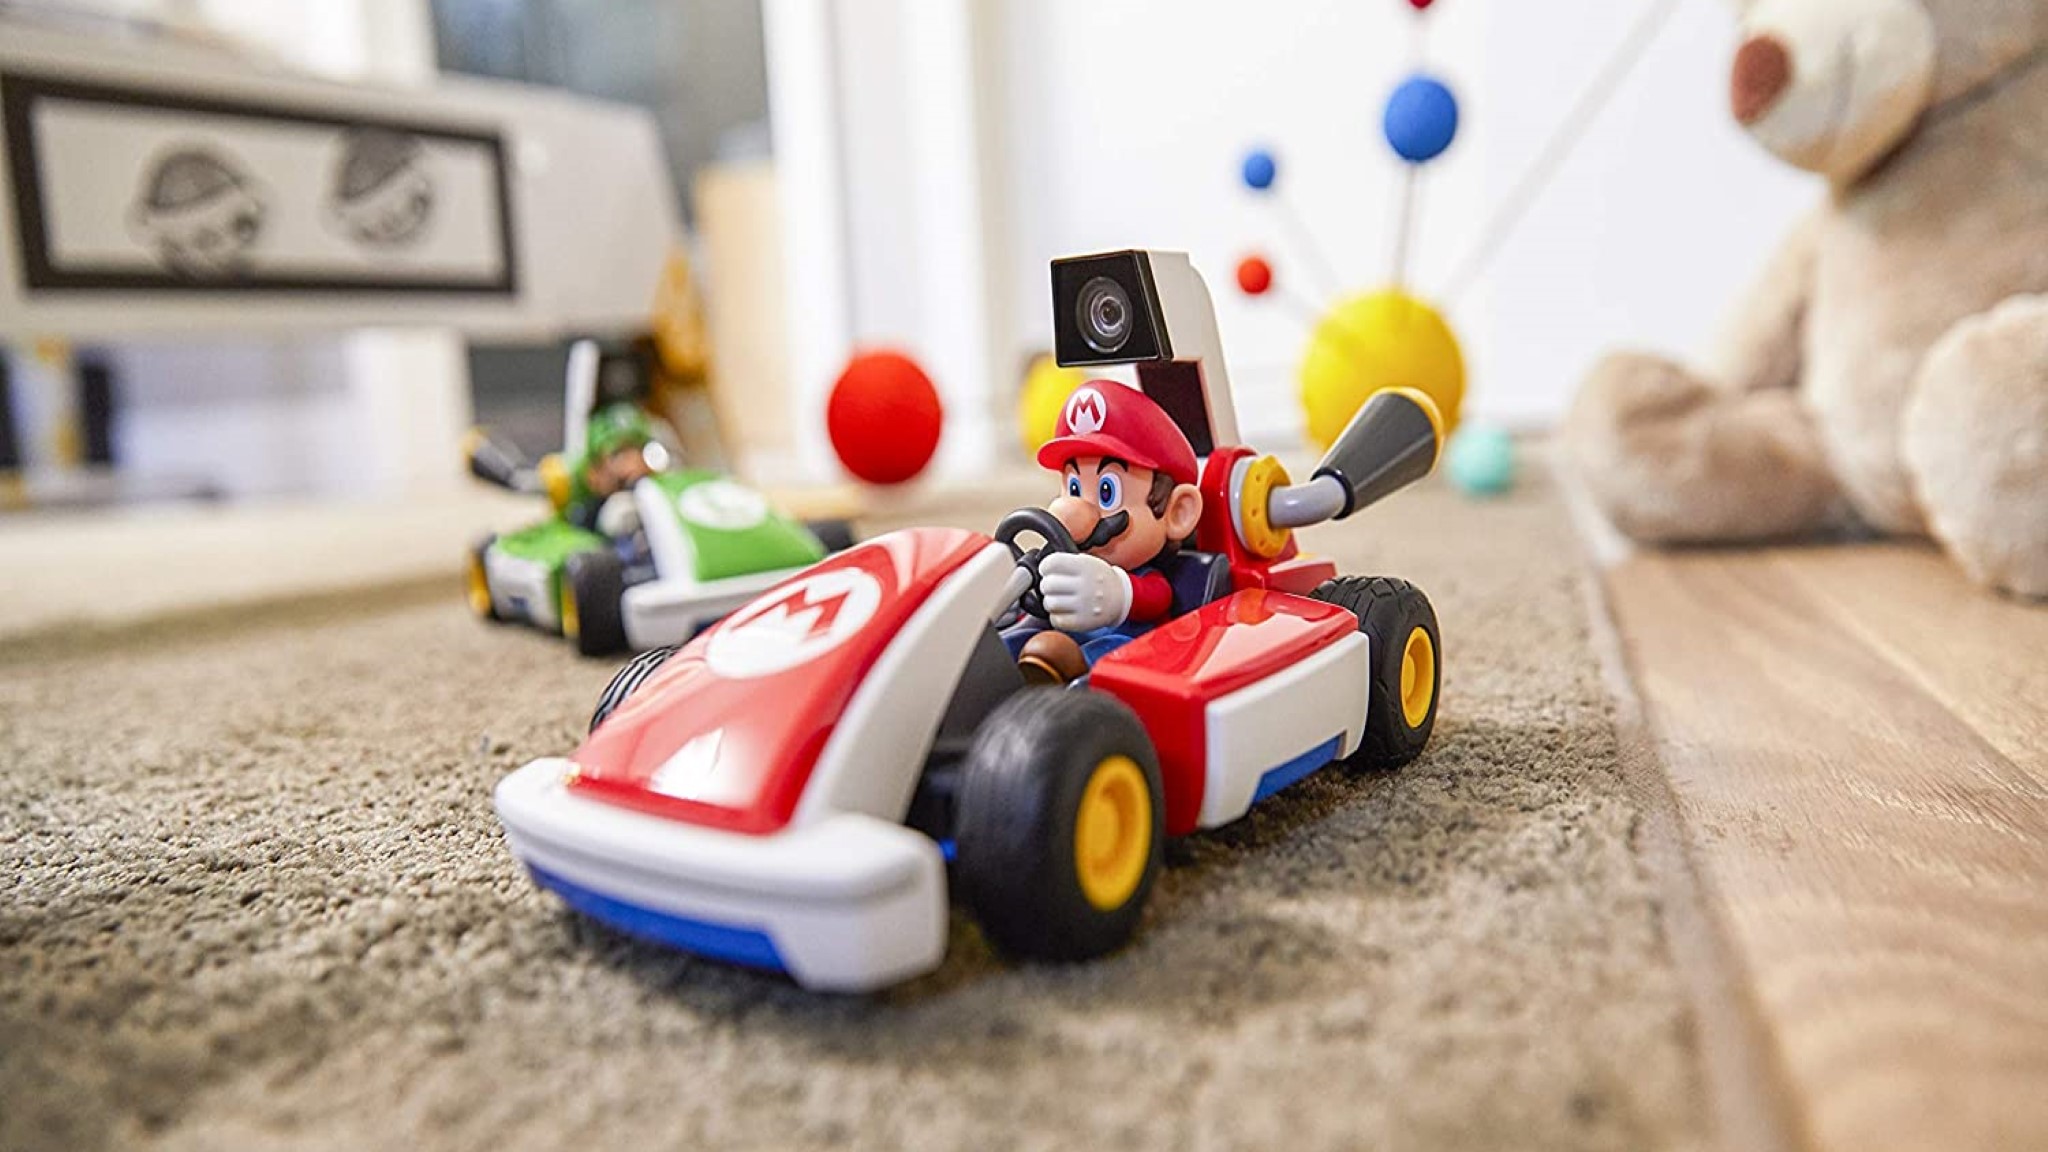 Mario Kart Live: Home Circuit  Pro Course Making Tips for SMALL  Apartments! 